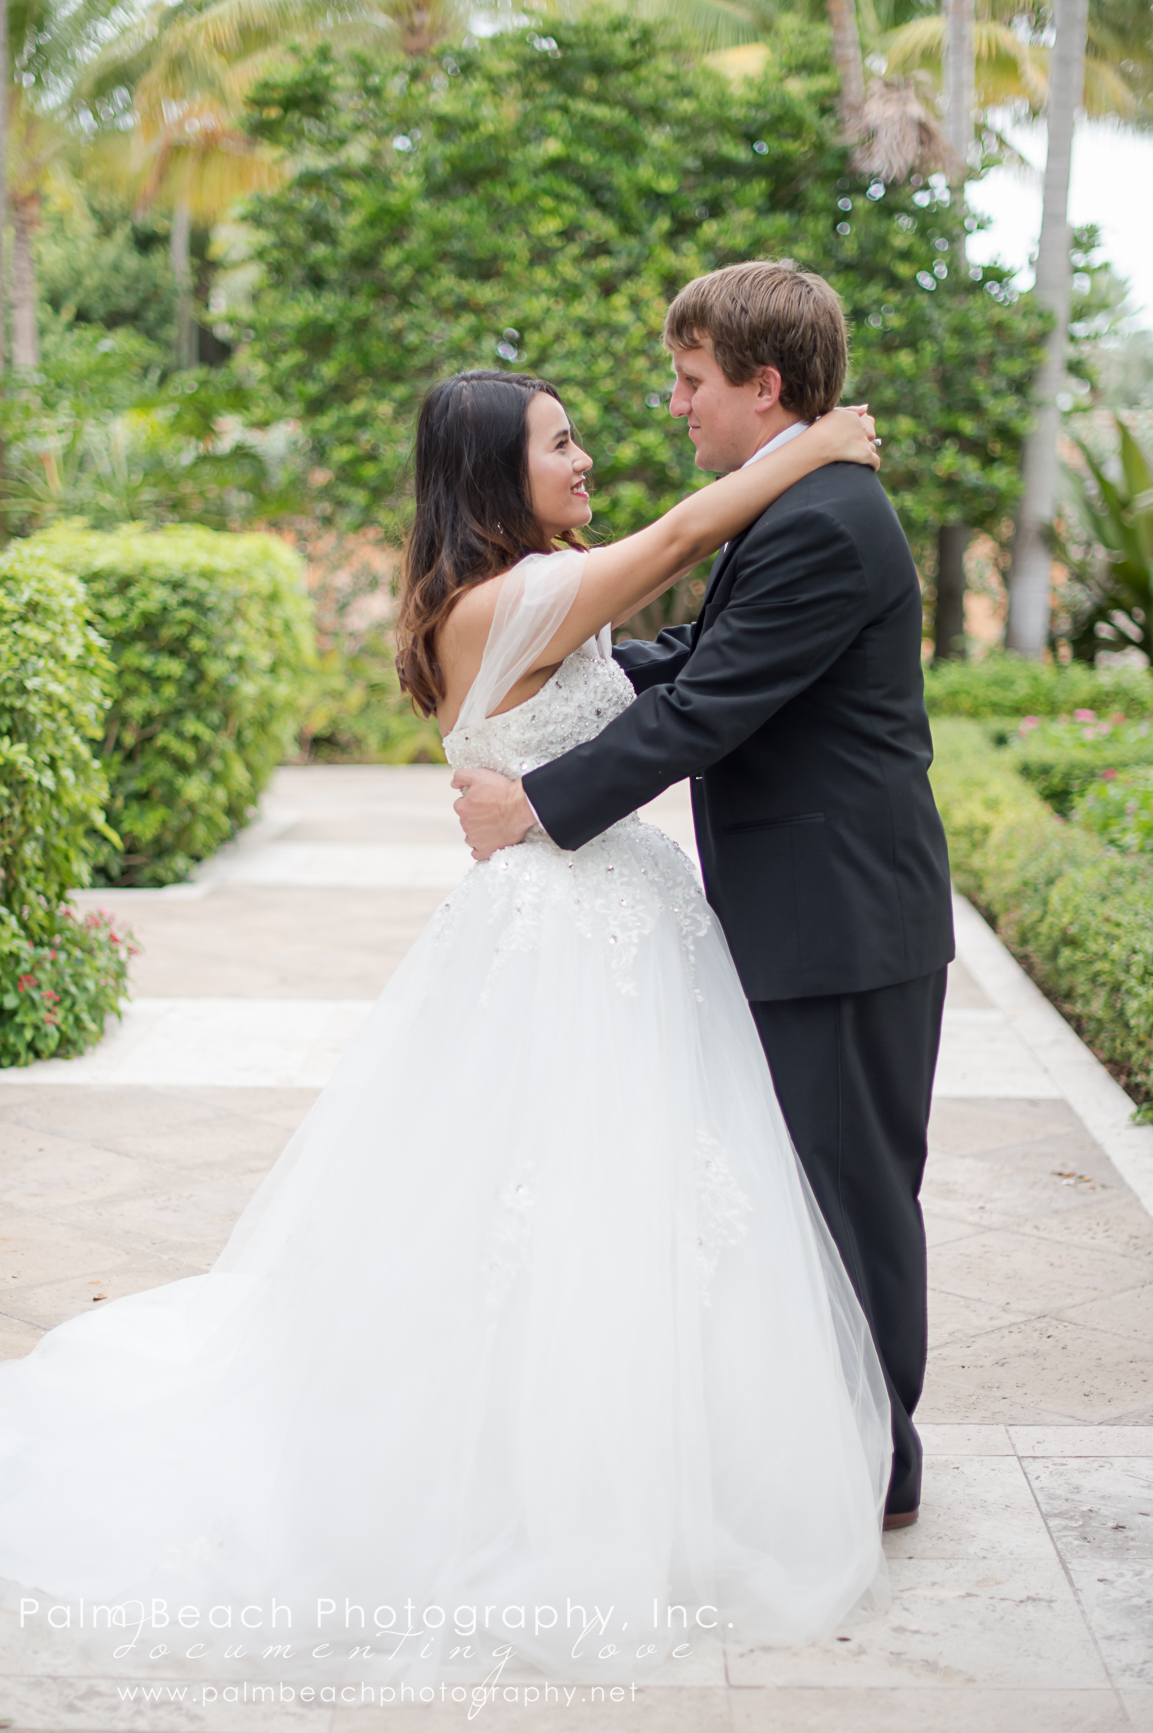 The Breakers Wedding Session by Palm Beach Photography, Inc.